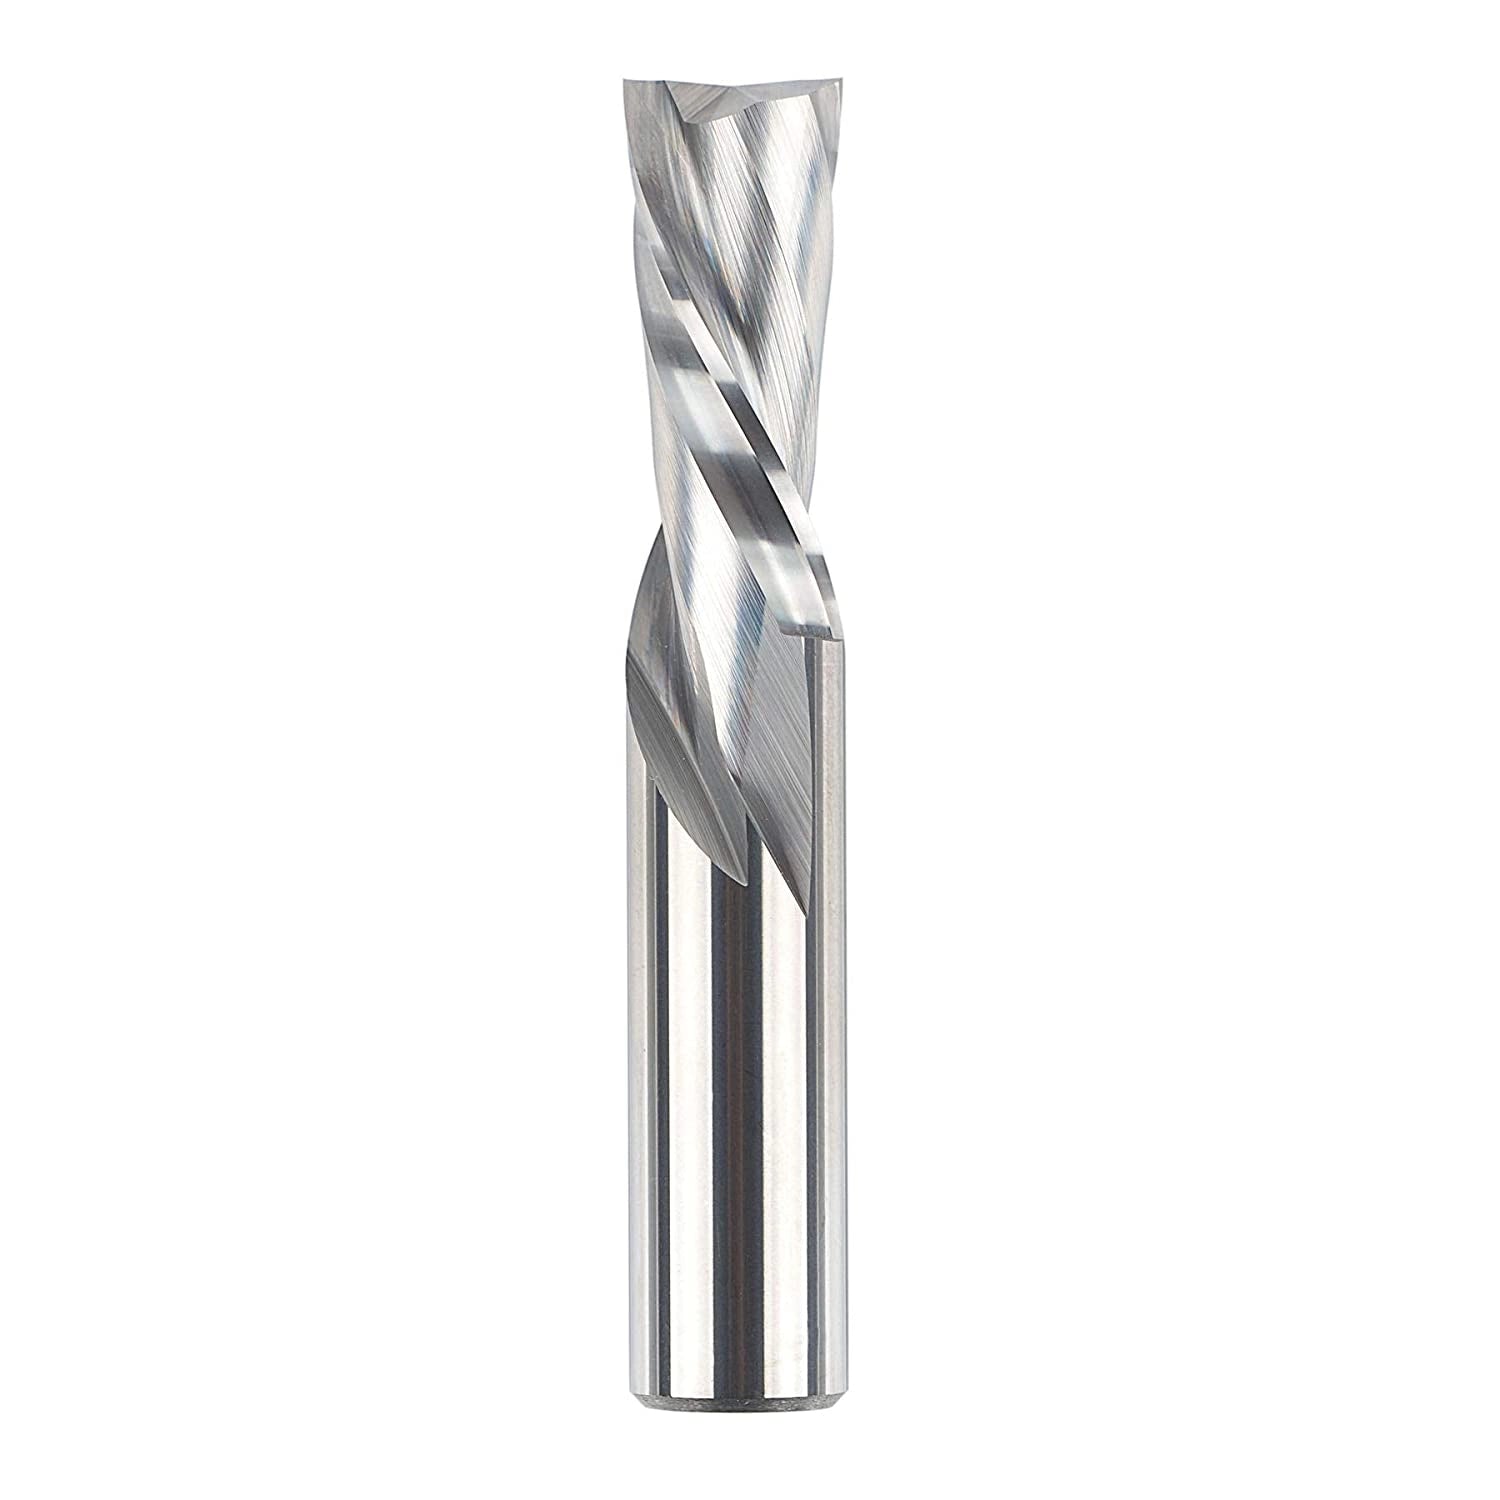 SpeTool Spiral Down cut Router Bit 1/2" Dia x 3" Extra Long End Mill